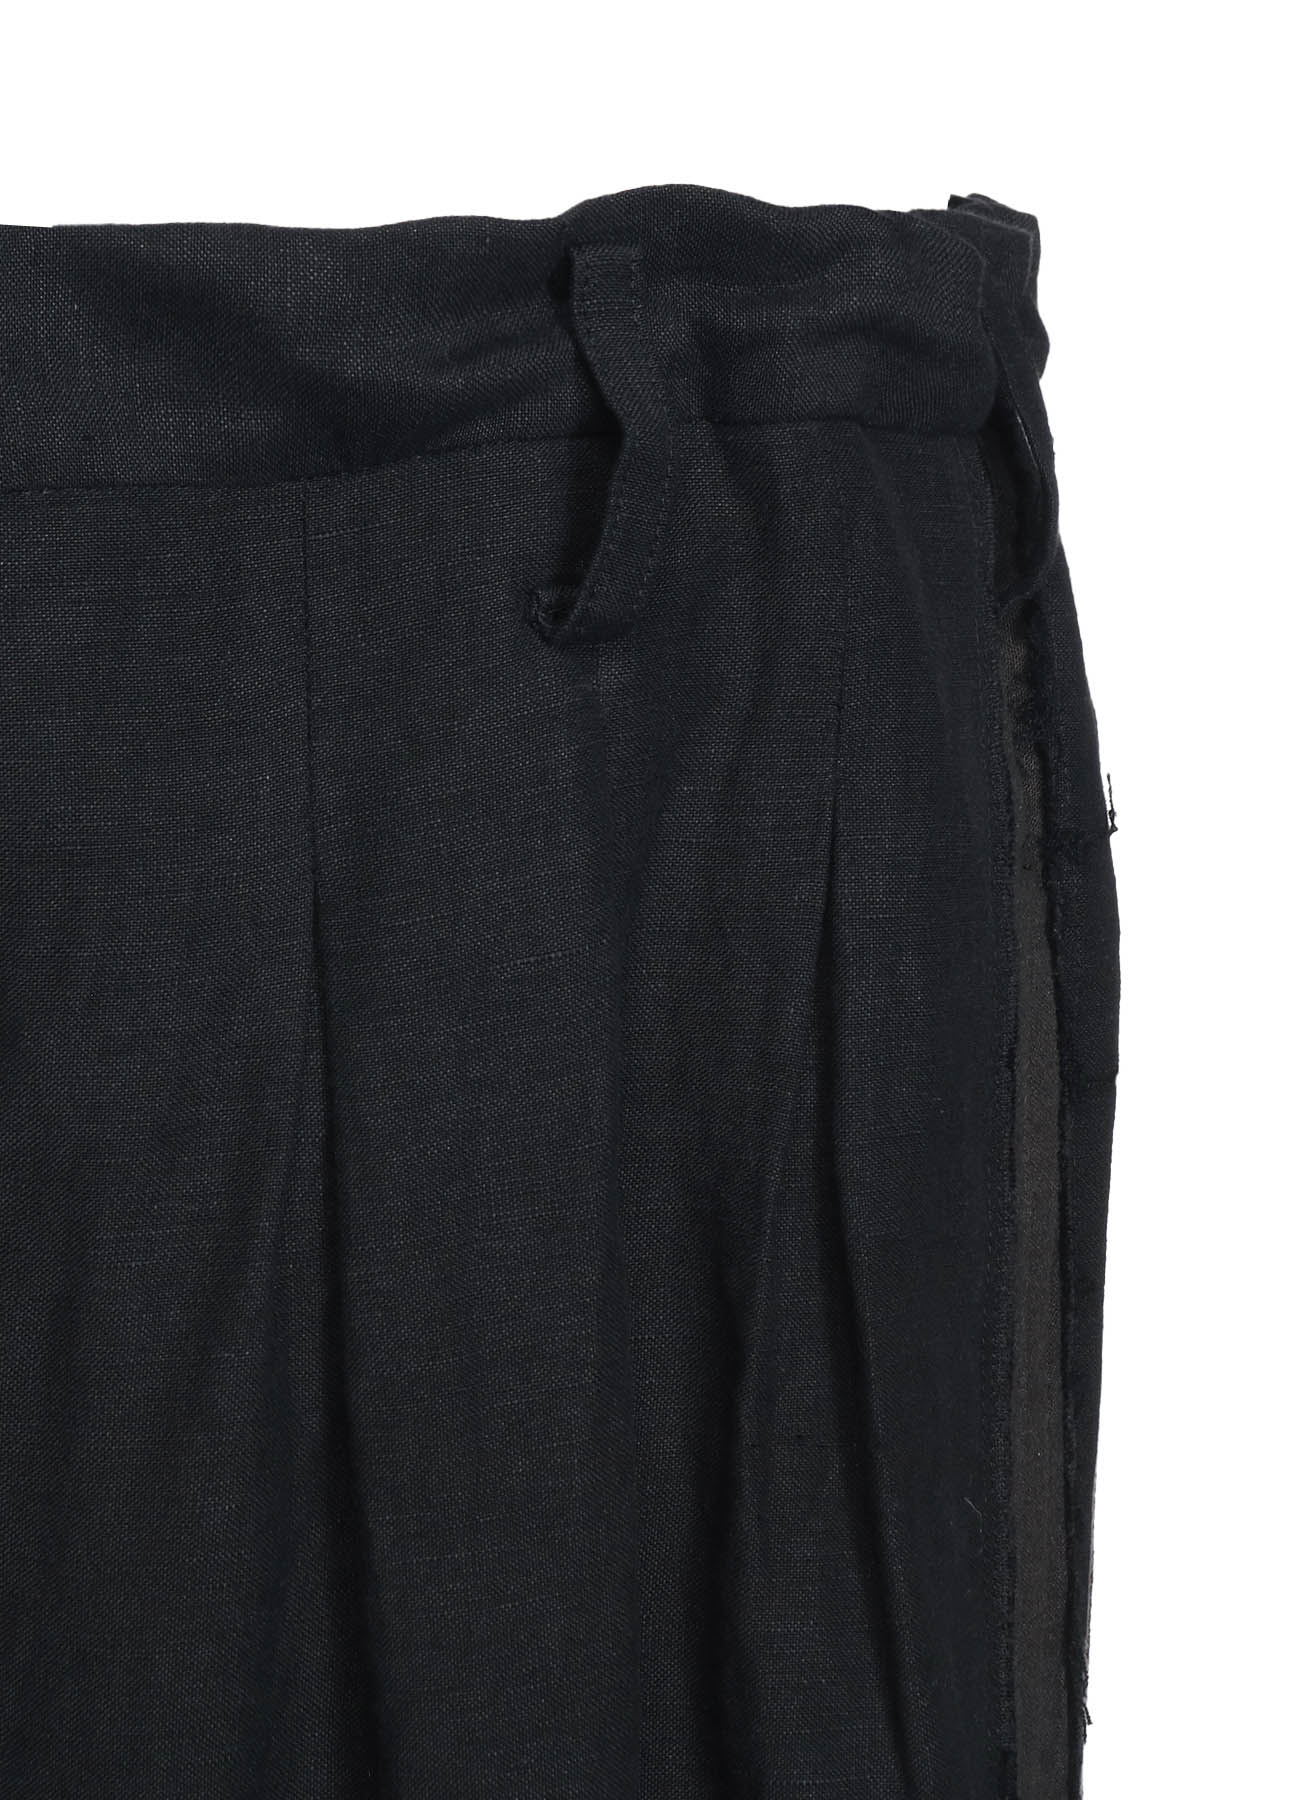 BIO-WASHED DUAL FABRIC 12-PLEATED PANTS WITH SIDE TAPE